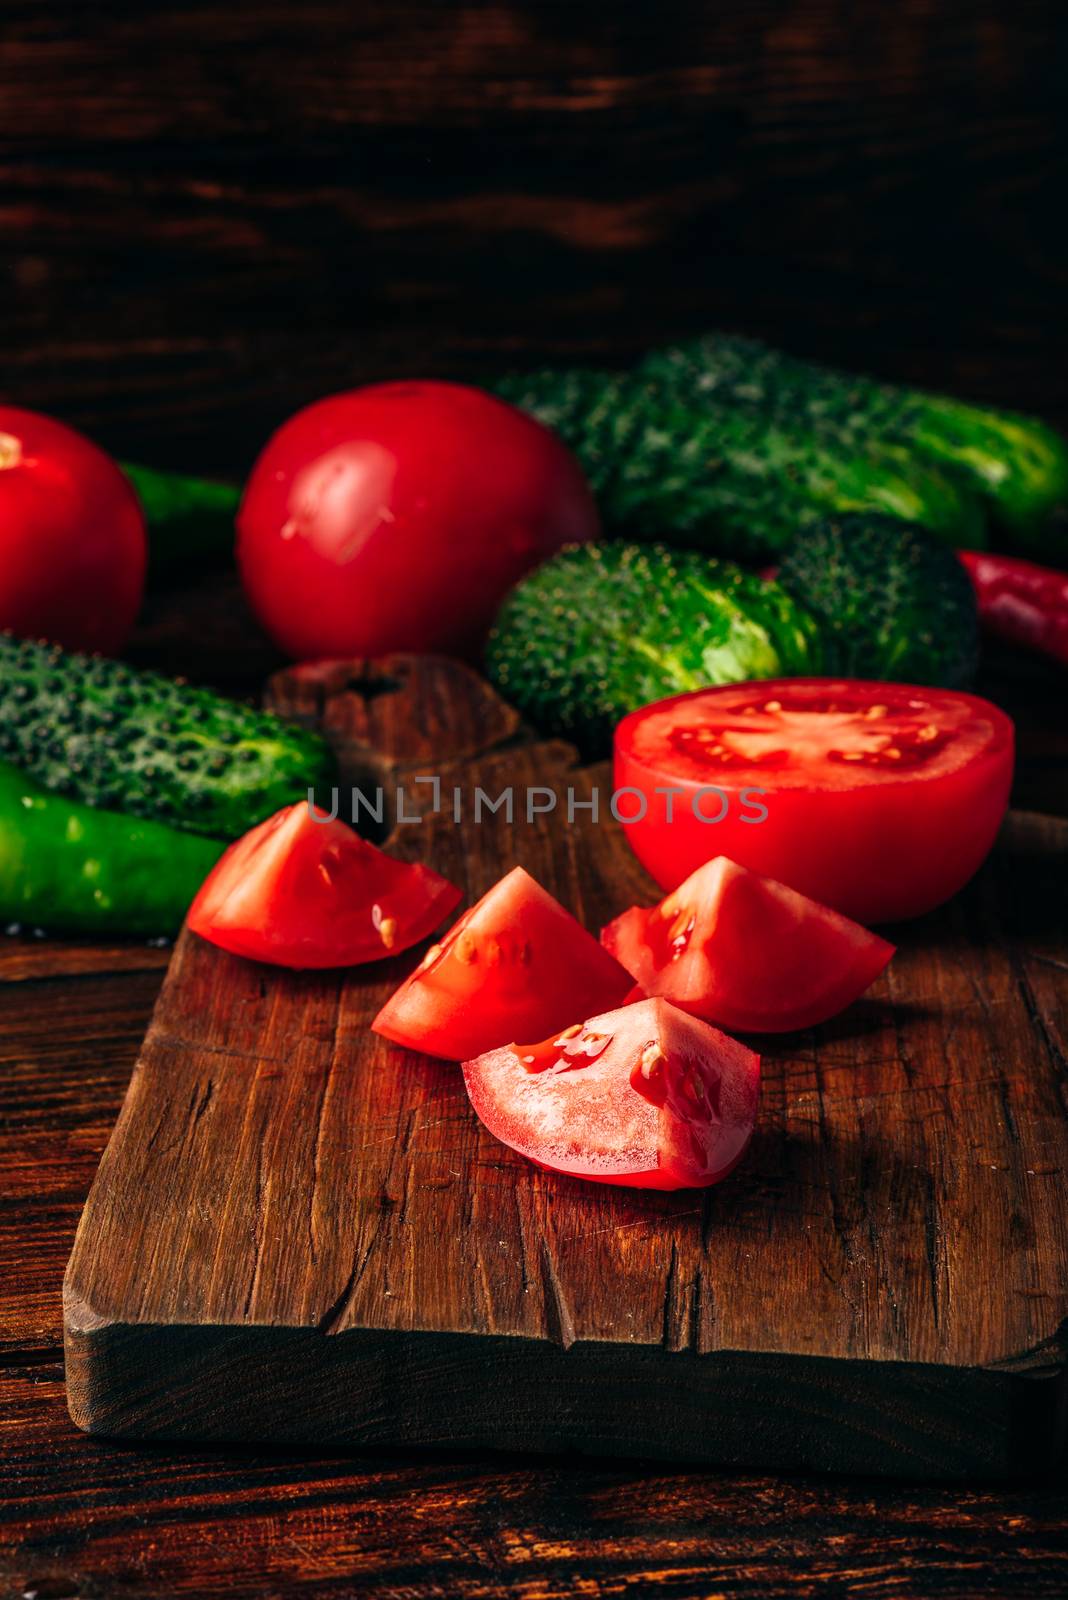 Sliced tomatoes on cutting board and cucumbers with chili pepper by Seva_blsv